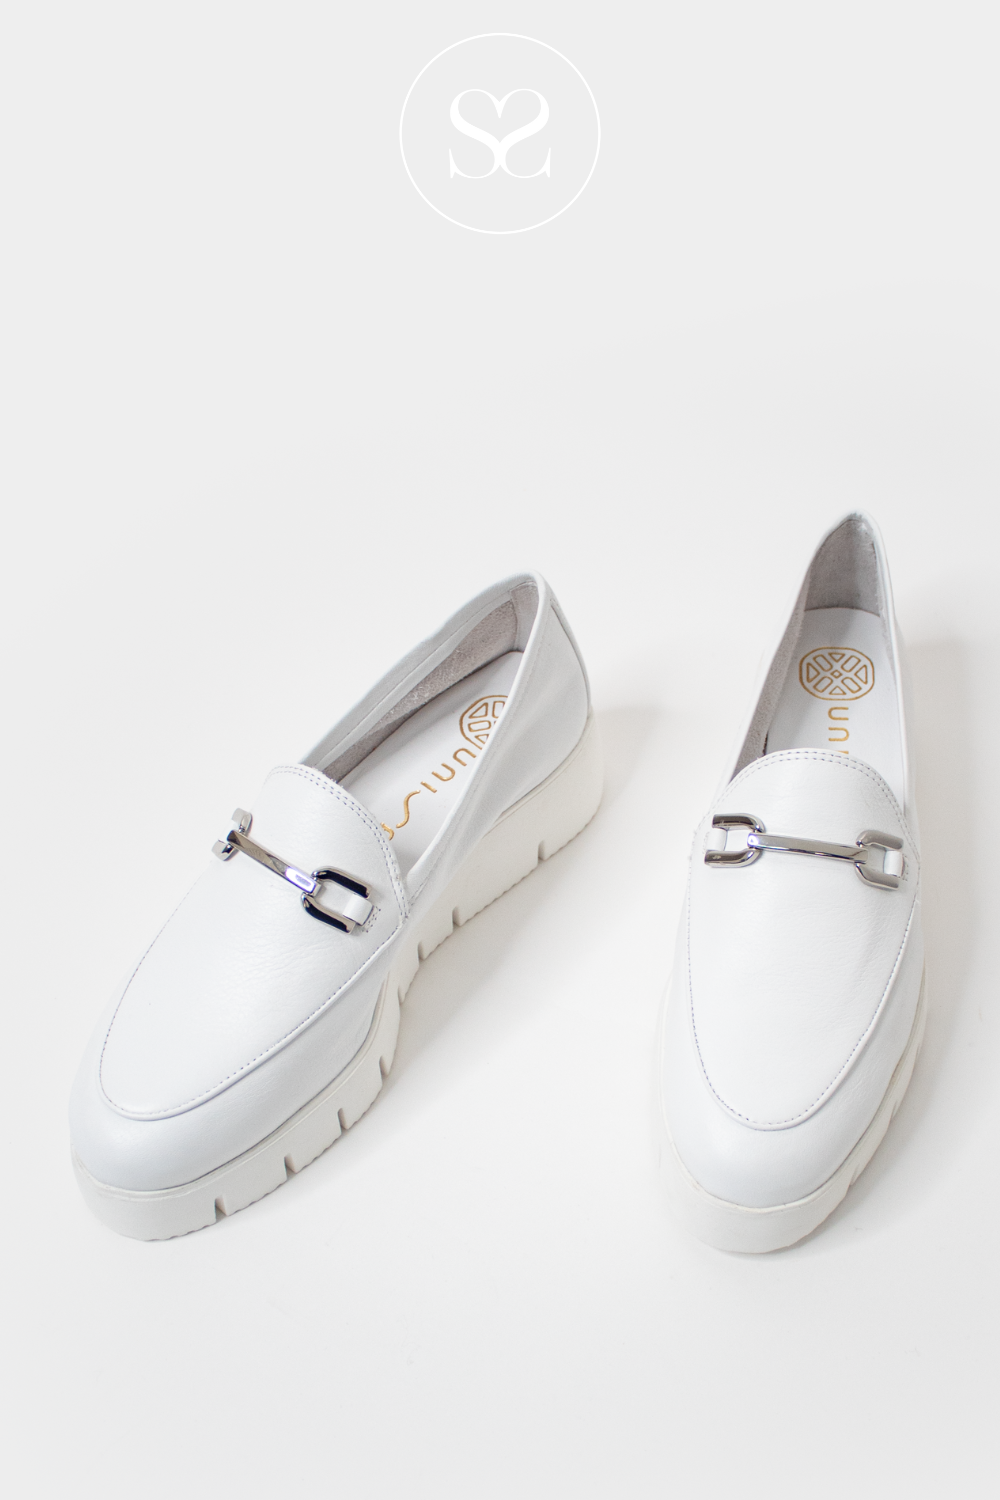 UNISA FAMO WHITE LEATHER SLIP ON WEDGE LOAFERS WITH SILVER BUCKLE